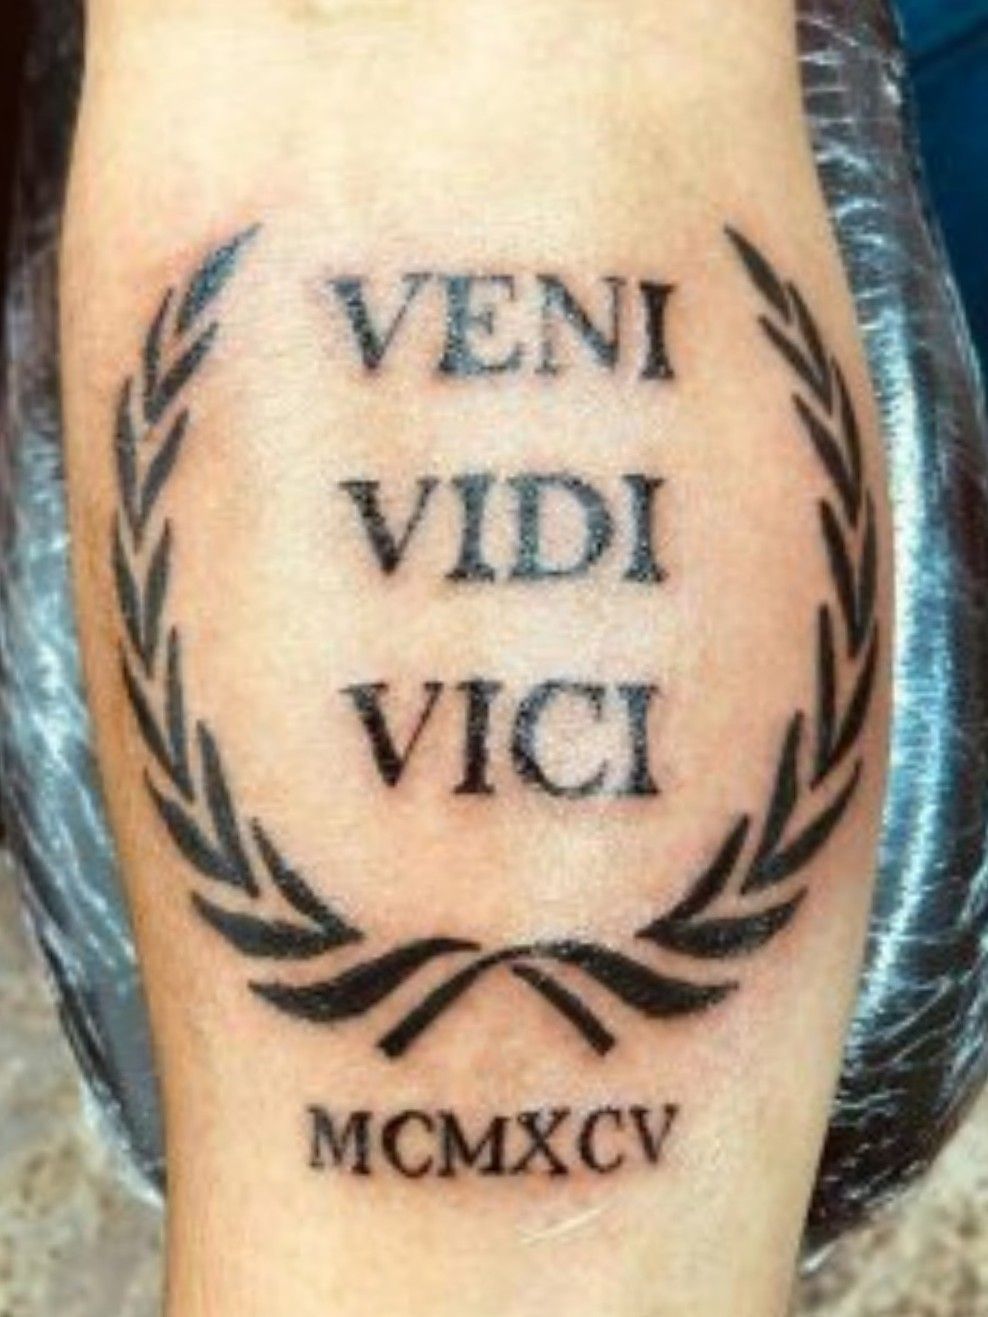 Veni vidi vici tattoo cannot be mistake whether you are men or women